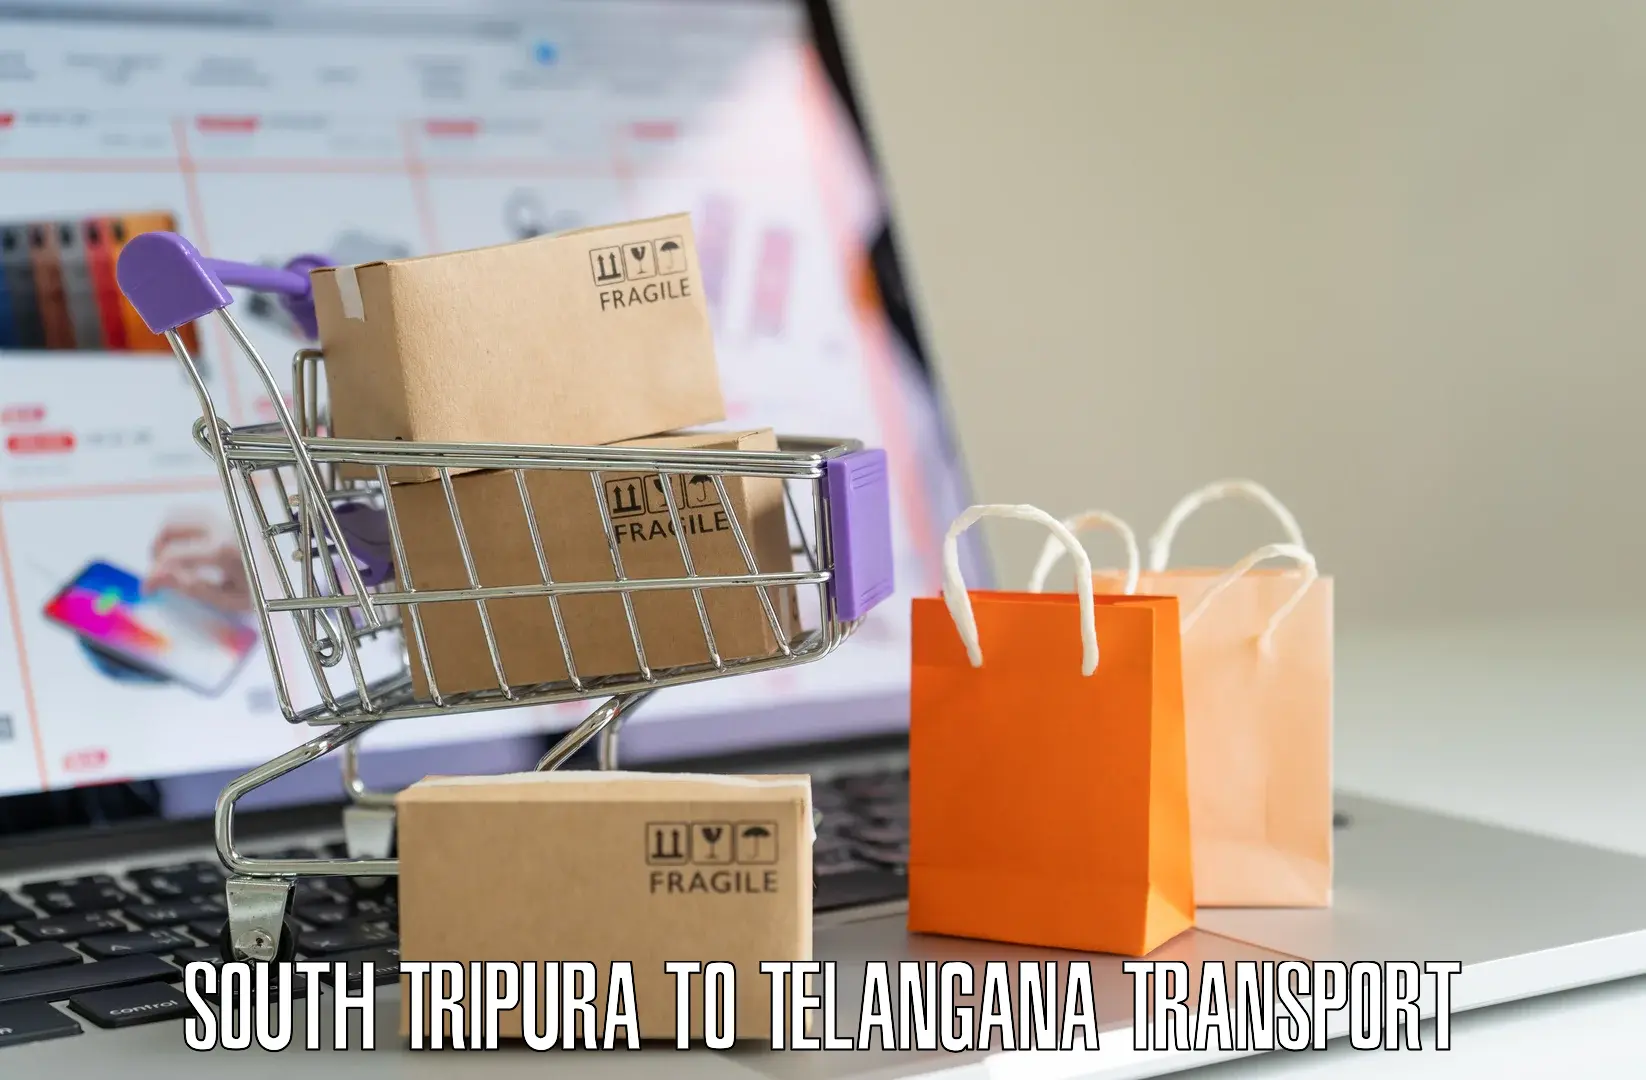 Domestic goods transportation services South Tripura to Eligedu